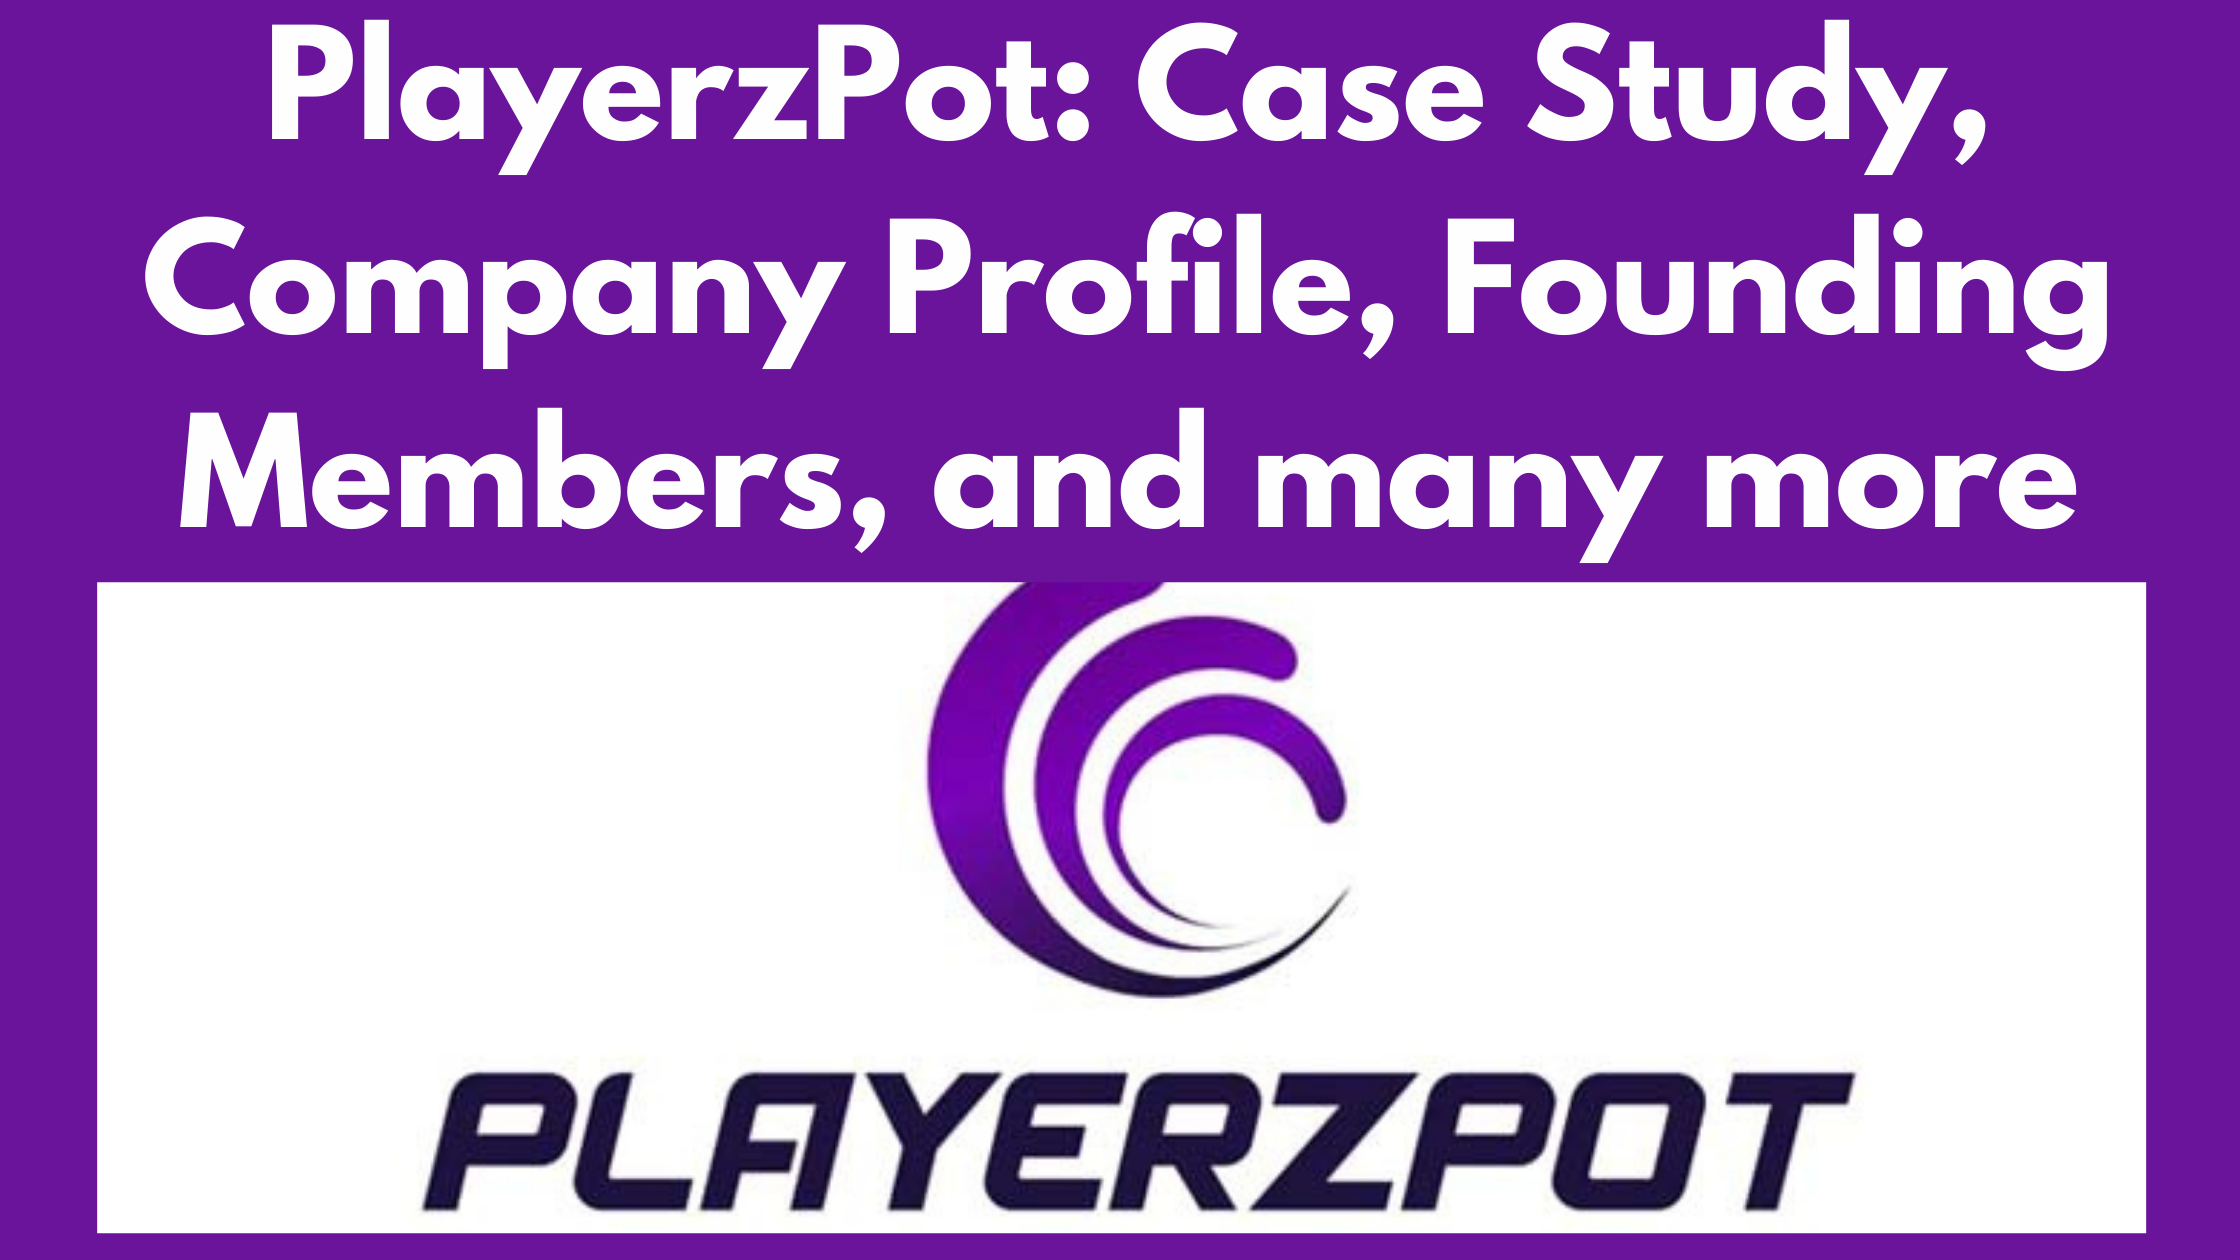 PlayerzPot: Case Study, Company Profile, Founding Members, and many more